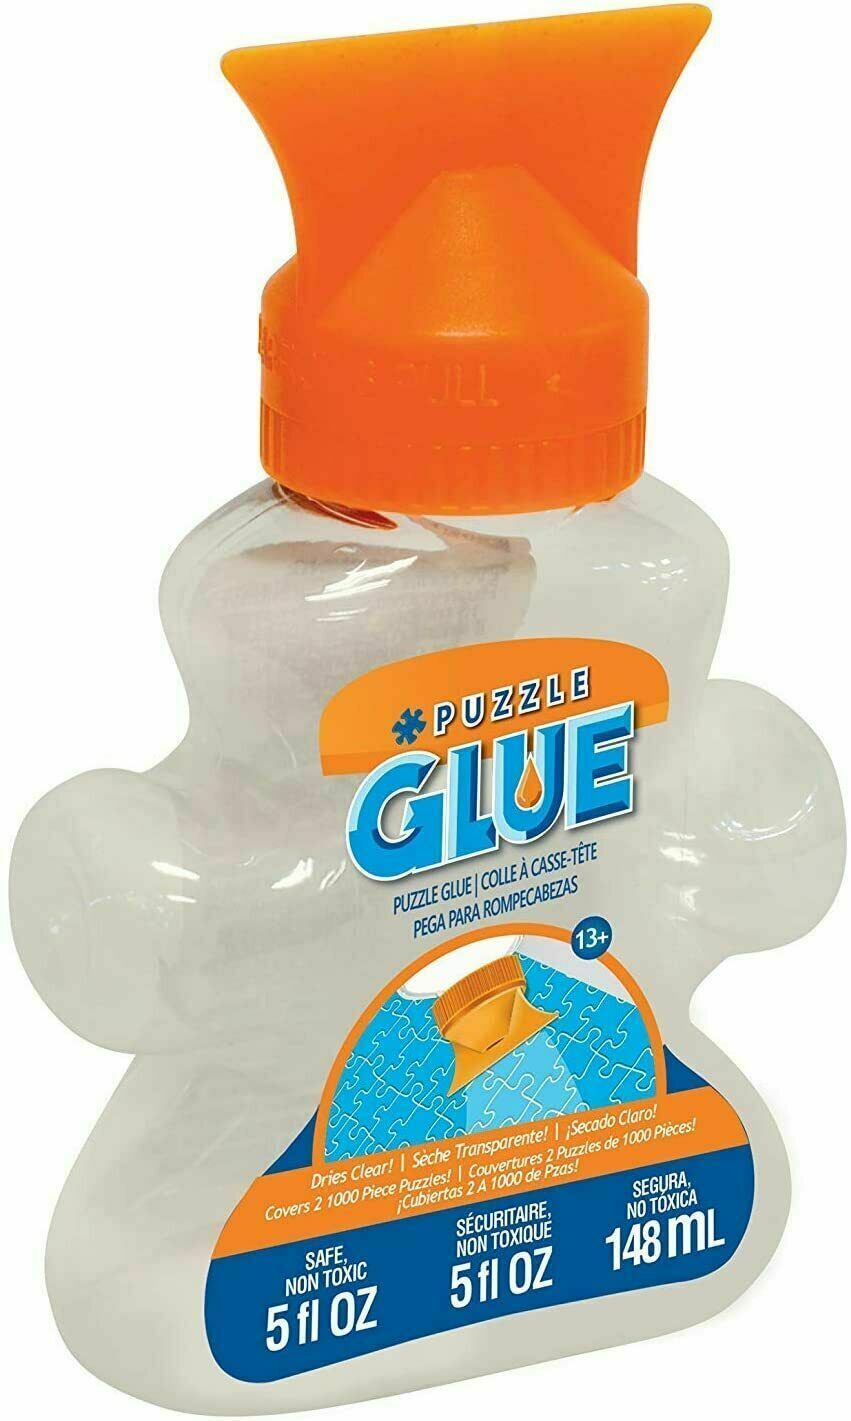 Masterpieces Puzzle Glue Jigsaw Shaped Bottle, Spreader Included, 5 Fl Oz